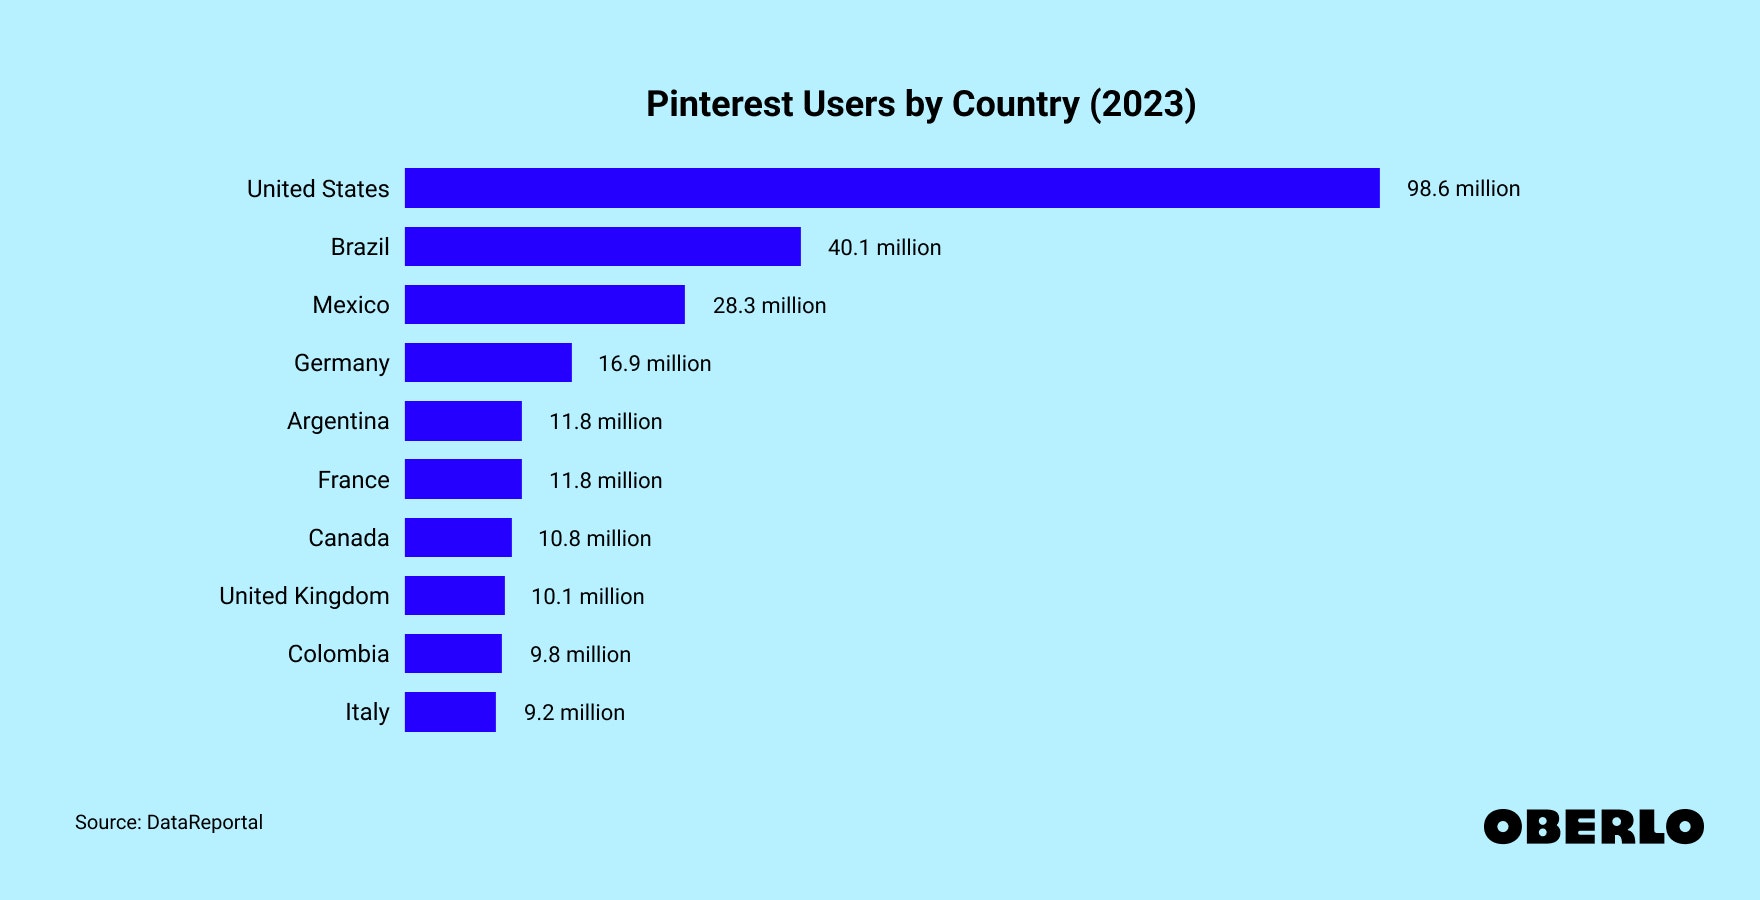 Chart showing the Pinterest Users by Country in 2023